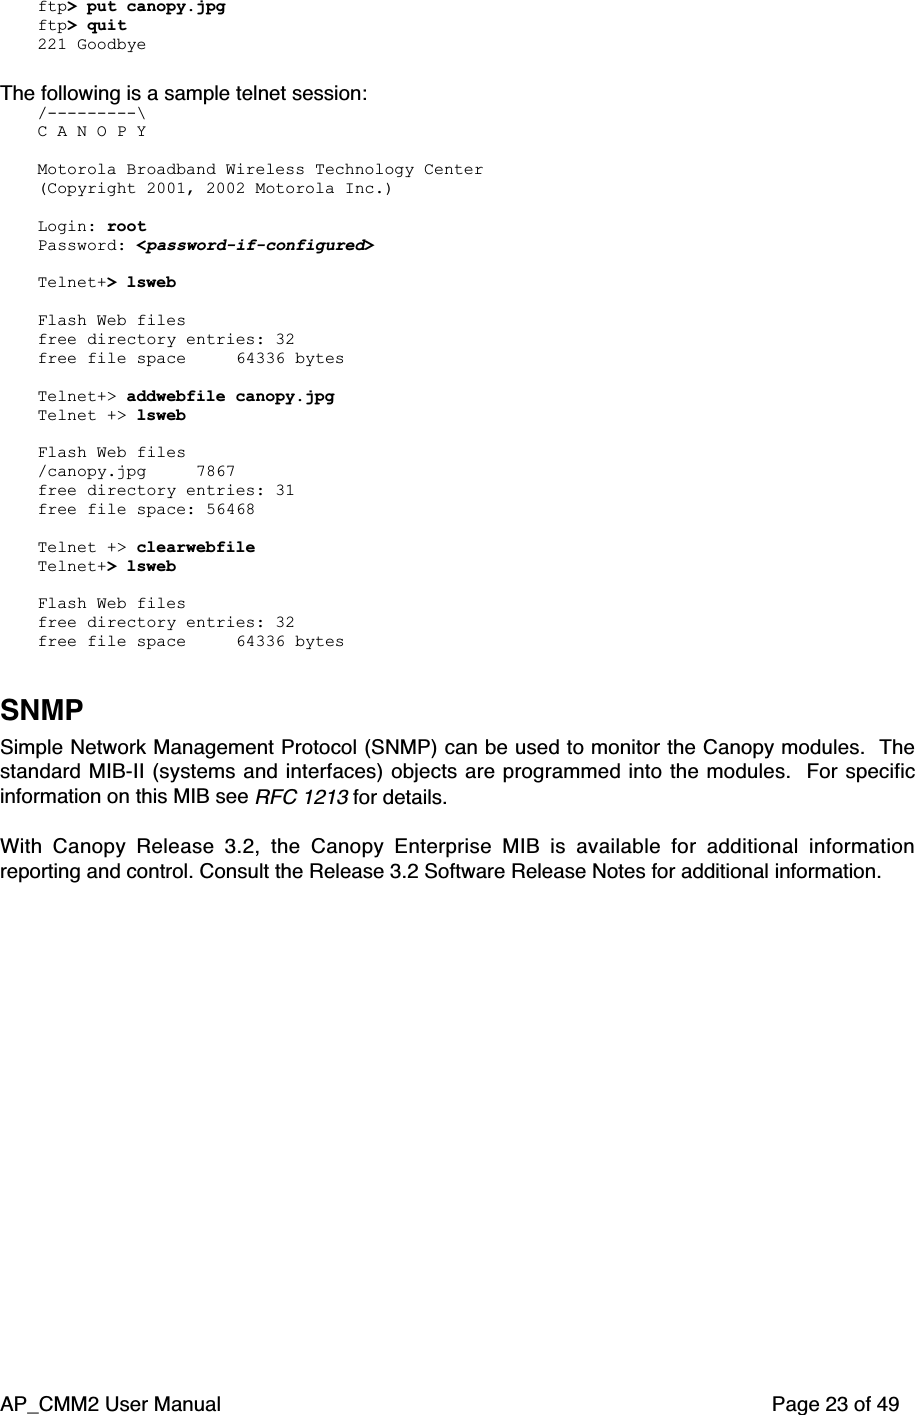 AP_CMM2 User Manual Page 23 of 49ftp&gt; put canopy.jpgftp&gt; quit221 GoodbyeThe following is a sample telnet session:/---------\C A N O P YMotorola Broadband Wireless Technology Center(Copyright 2001, 2002 Motorola Inc.)Login: rootPassword: &lt;password-if-configured&gt;Telnet+&gt; lswebFlash Web filesfree directory entries: 32free file space     64336 bytesTelnet+&gt; addwebfile canopy.jpgTelnet +&gt; lswebFlash Web files/canopy.jpg     7867free directory entries: 31free file space: 56468Telnet +&gt; clearwebfileTelnet+&gt; lswebFlash Web filesfree directory entries: 32free file space     64336 bytesSNMPSimple Network Management Protocol (SNMP) can be used to monitor the Canopy modules.  Thestandard MIB-II (systems and interfaces) objects are programmed into the modules.  For specificinformation on this MIB see RFC 1213 for details.With Canopy Release 3.2, the Canopy Enterprise MIB is available for additional informationreporting and control. Consult the Release 3.2 Software Release Notes for additional information.